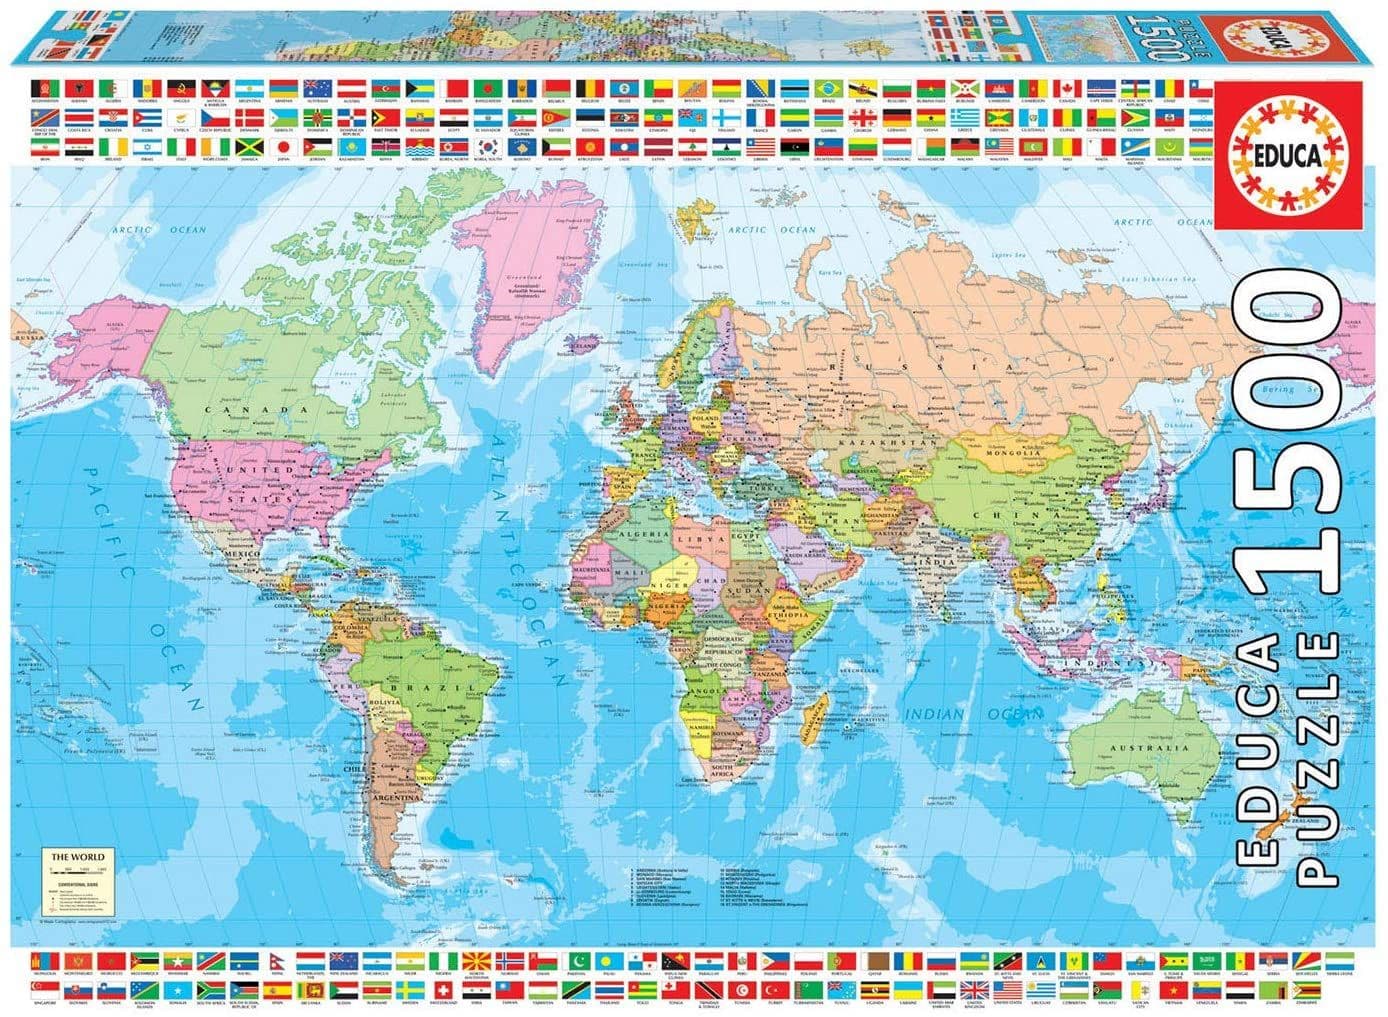 Educa - Map of the World - 1500 Piece Jigsaw Puzzle